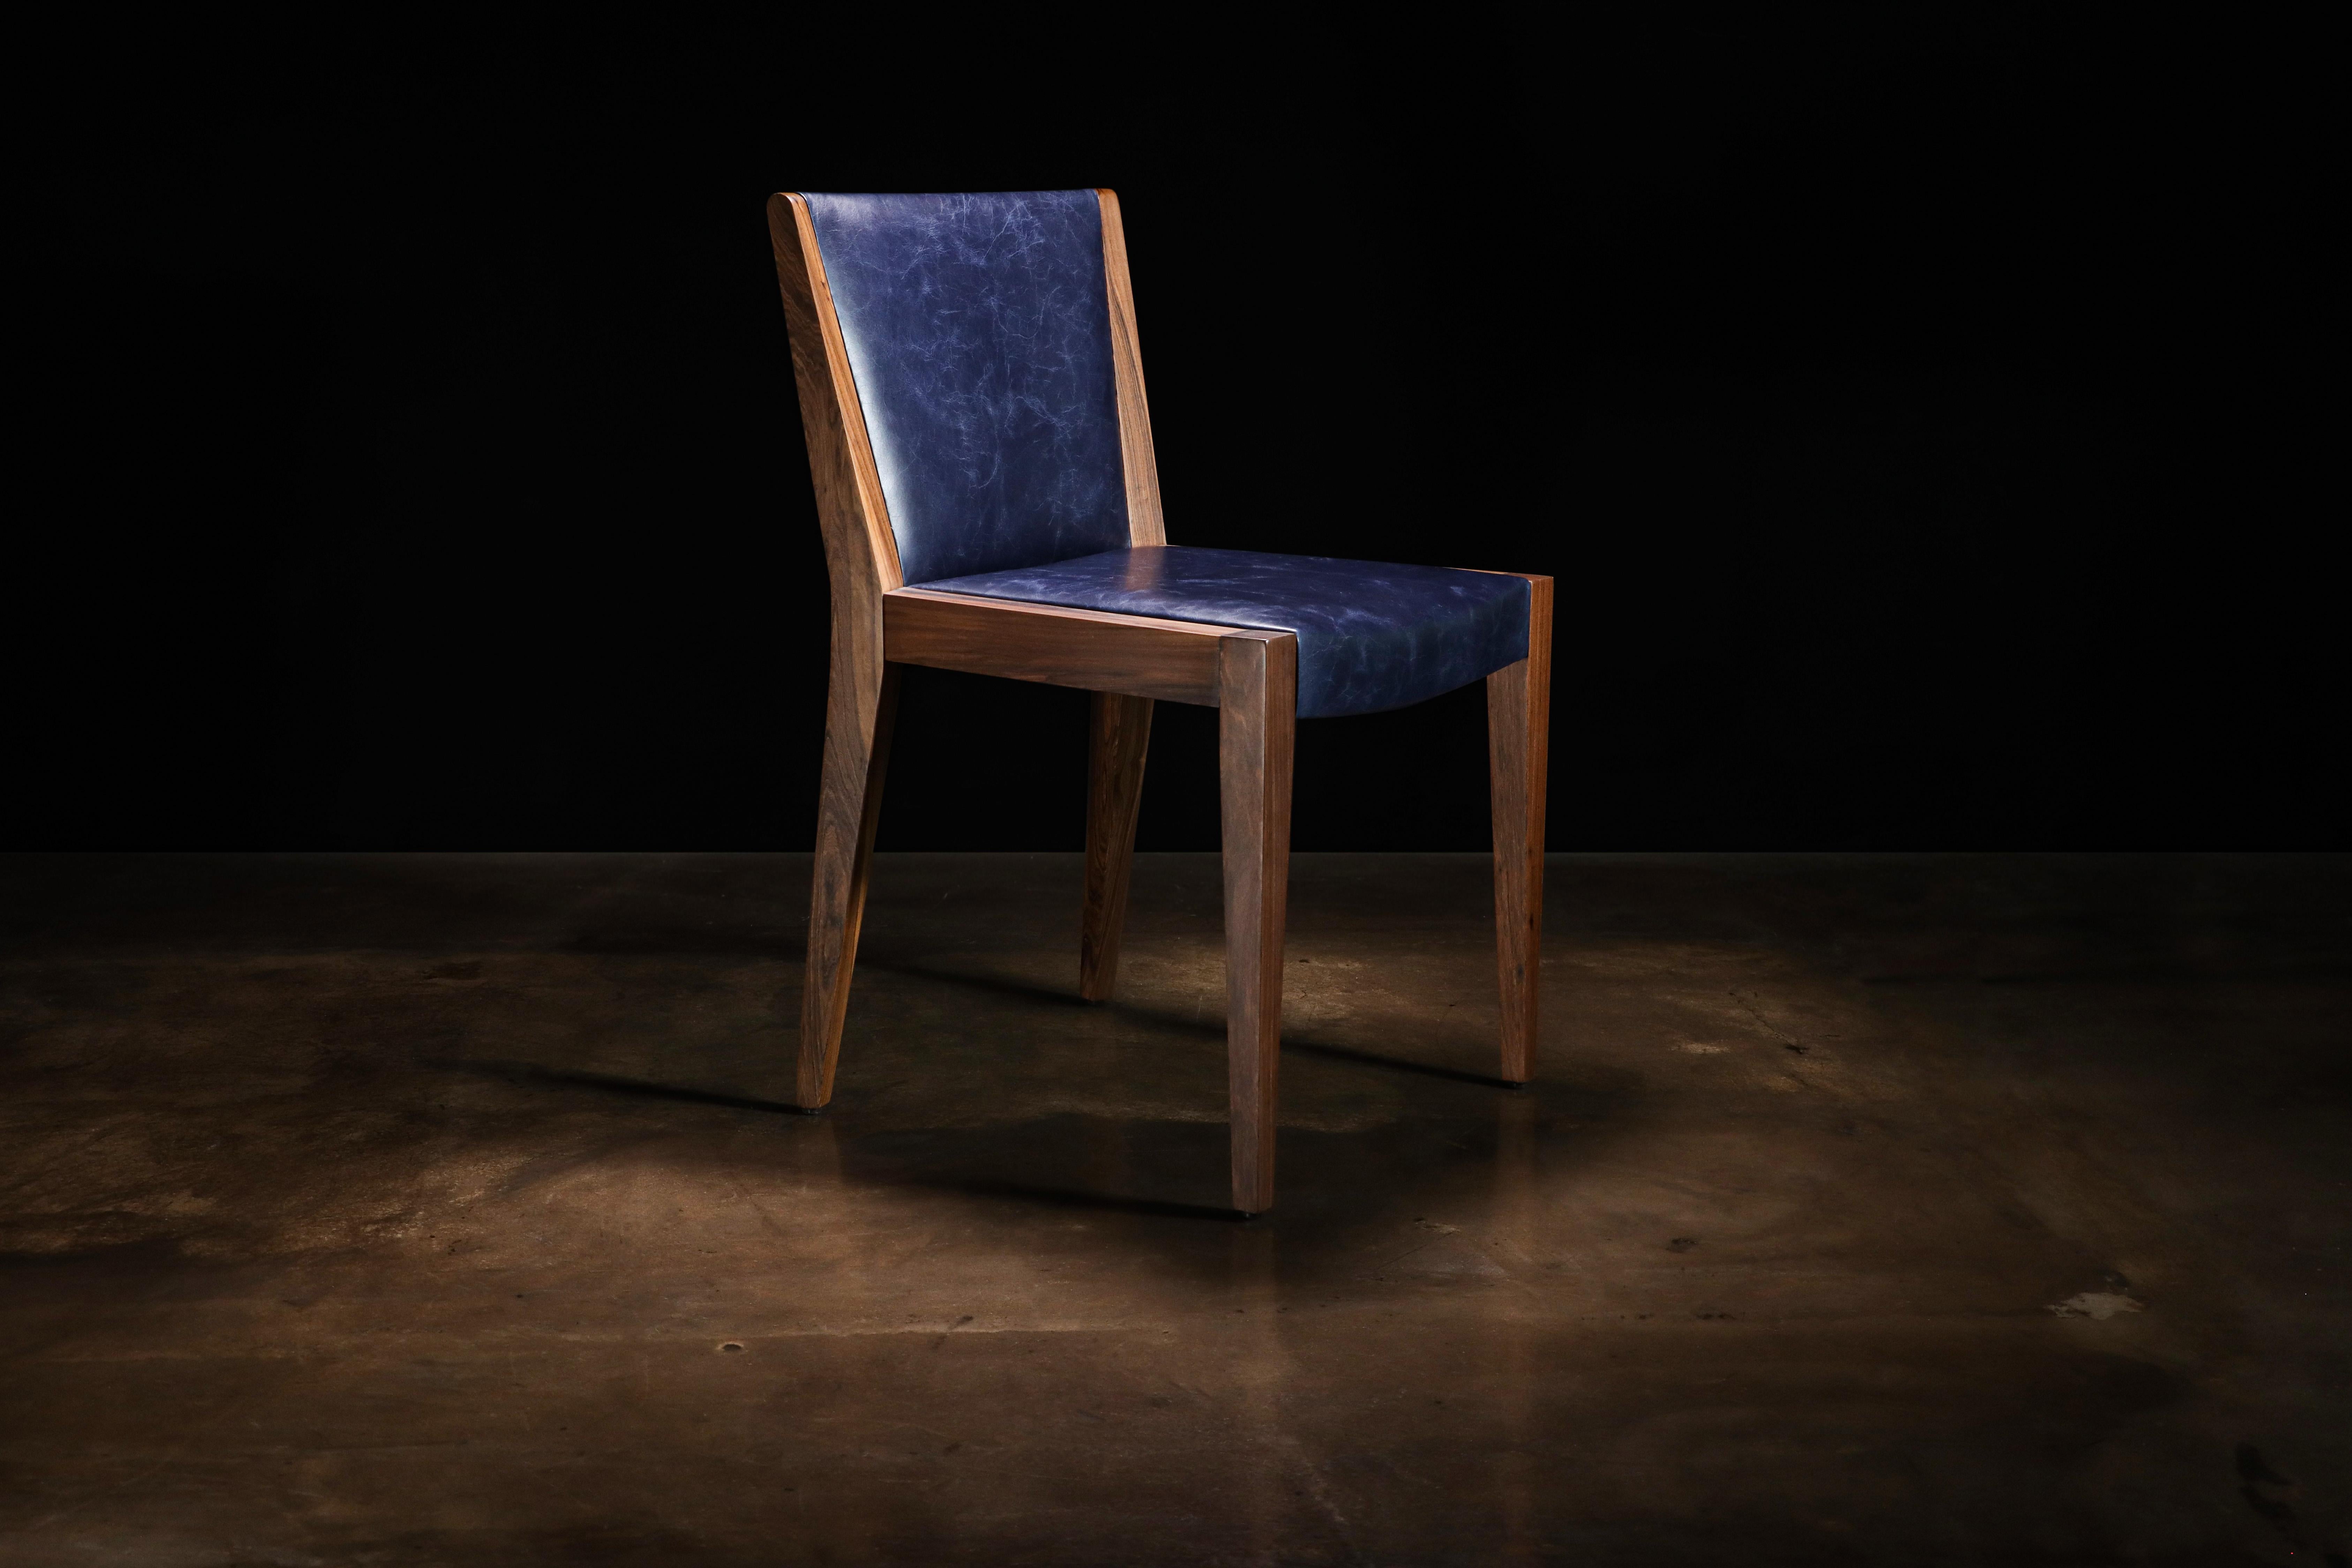 Giovanni Solid Argentine Rosewood and Leather Dining Chair from Costantini

Measurements are 19